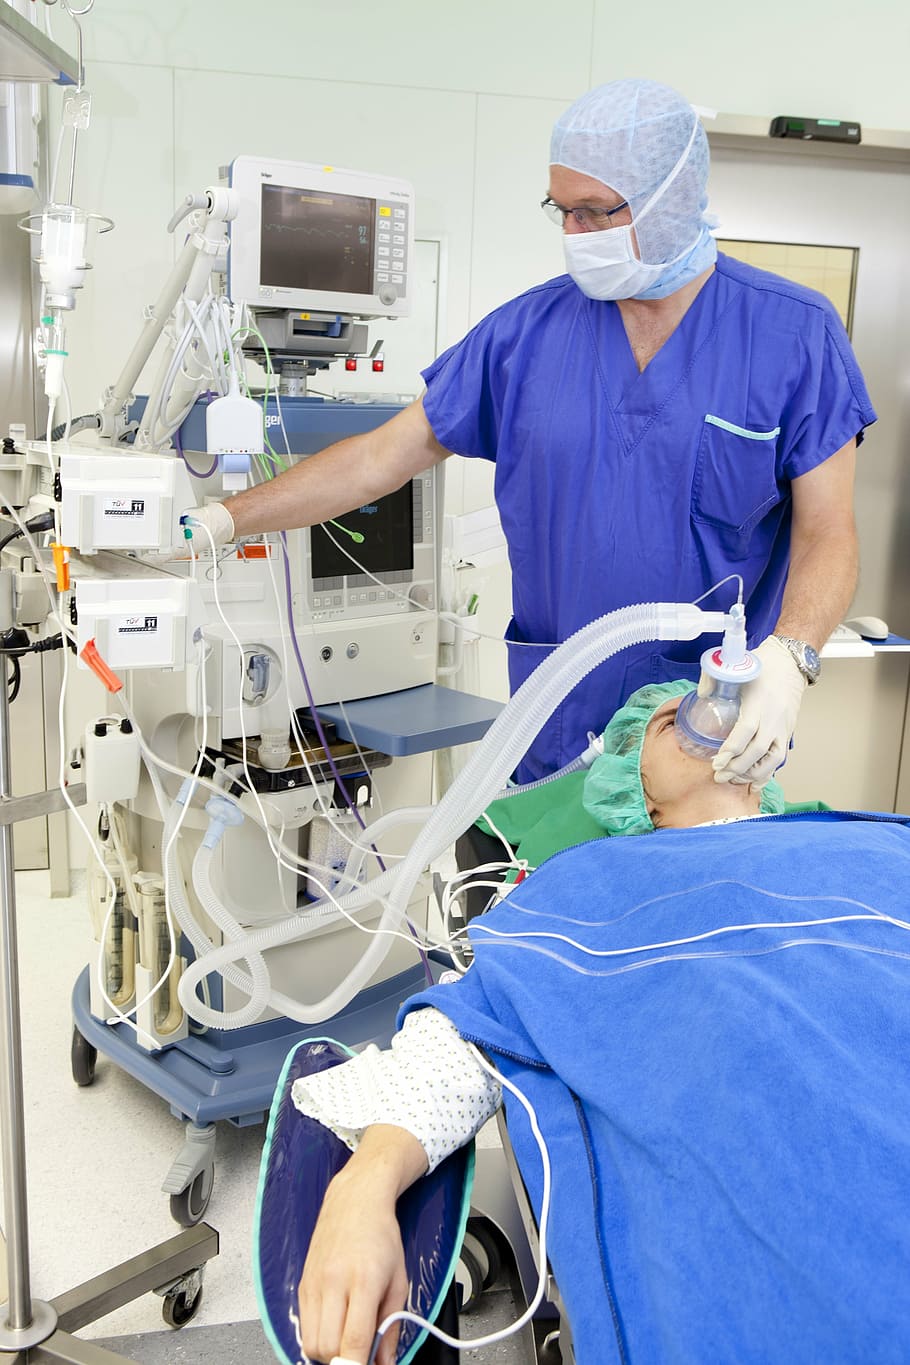 person using medical equipment on patient, operation, respiratory mask